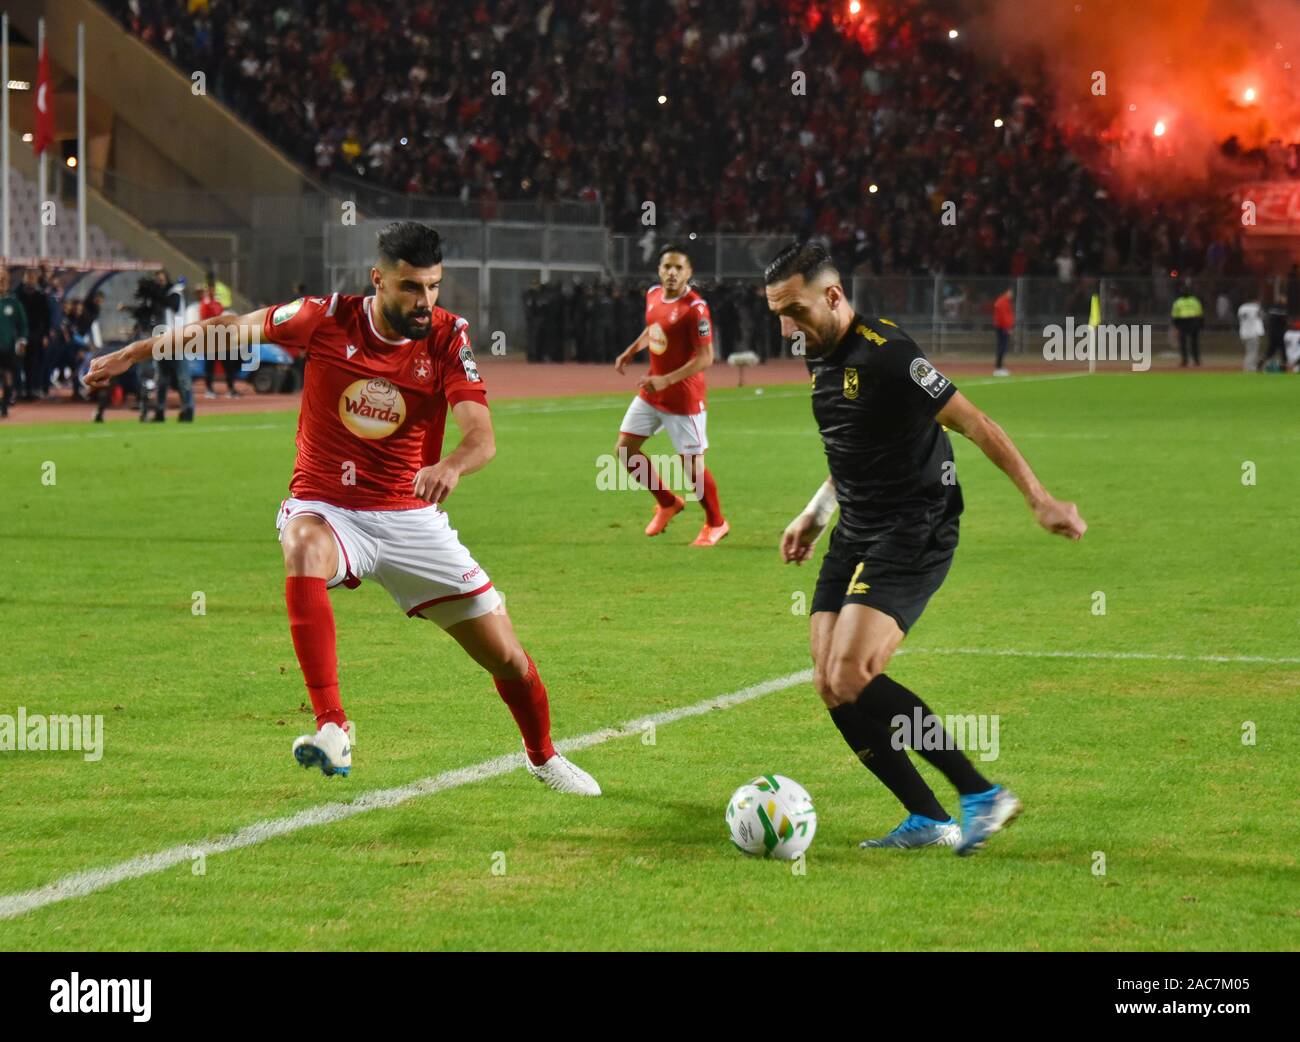 Al Ahly's Ali maaloul and Etoile's Zied boughatas in action during the CAF Champions League 2019 - 20 football match between Al-Ahly and Etoile sportive du sahel in Rades.(Final score: Etoile du Sahel 1 – 0 Al Ahly) Stock Photo